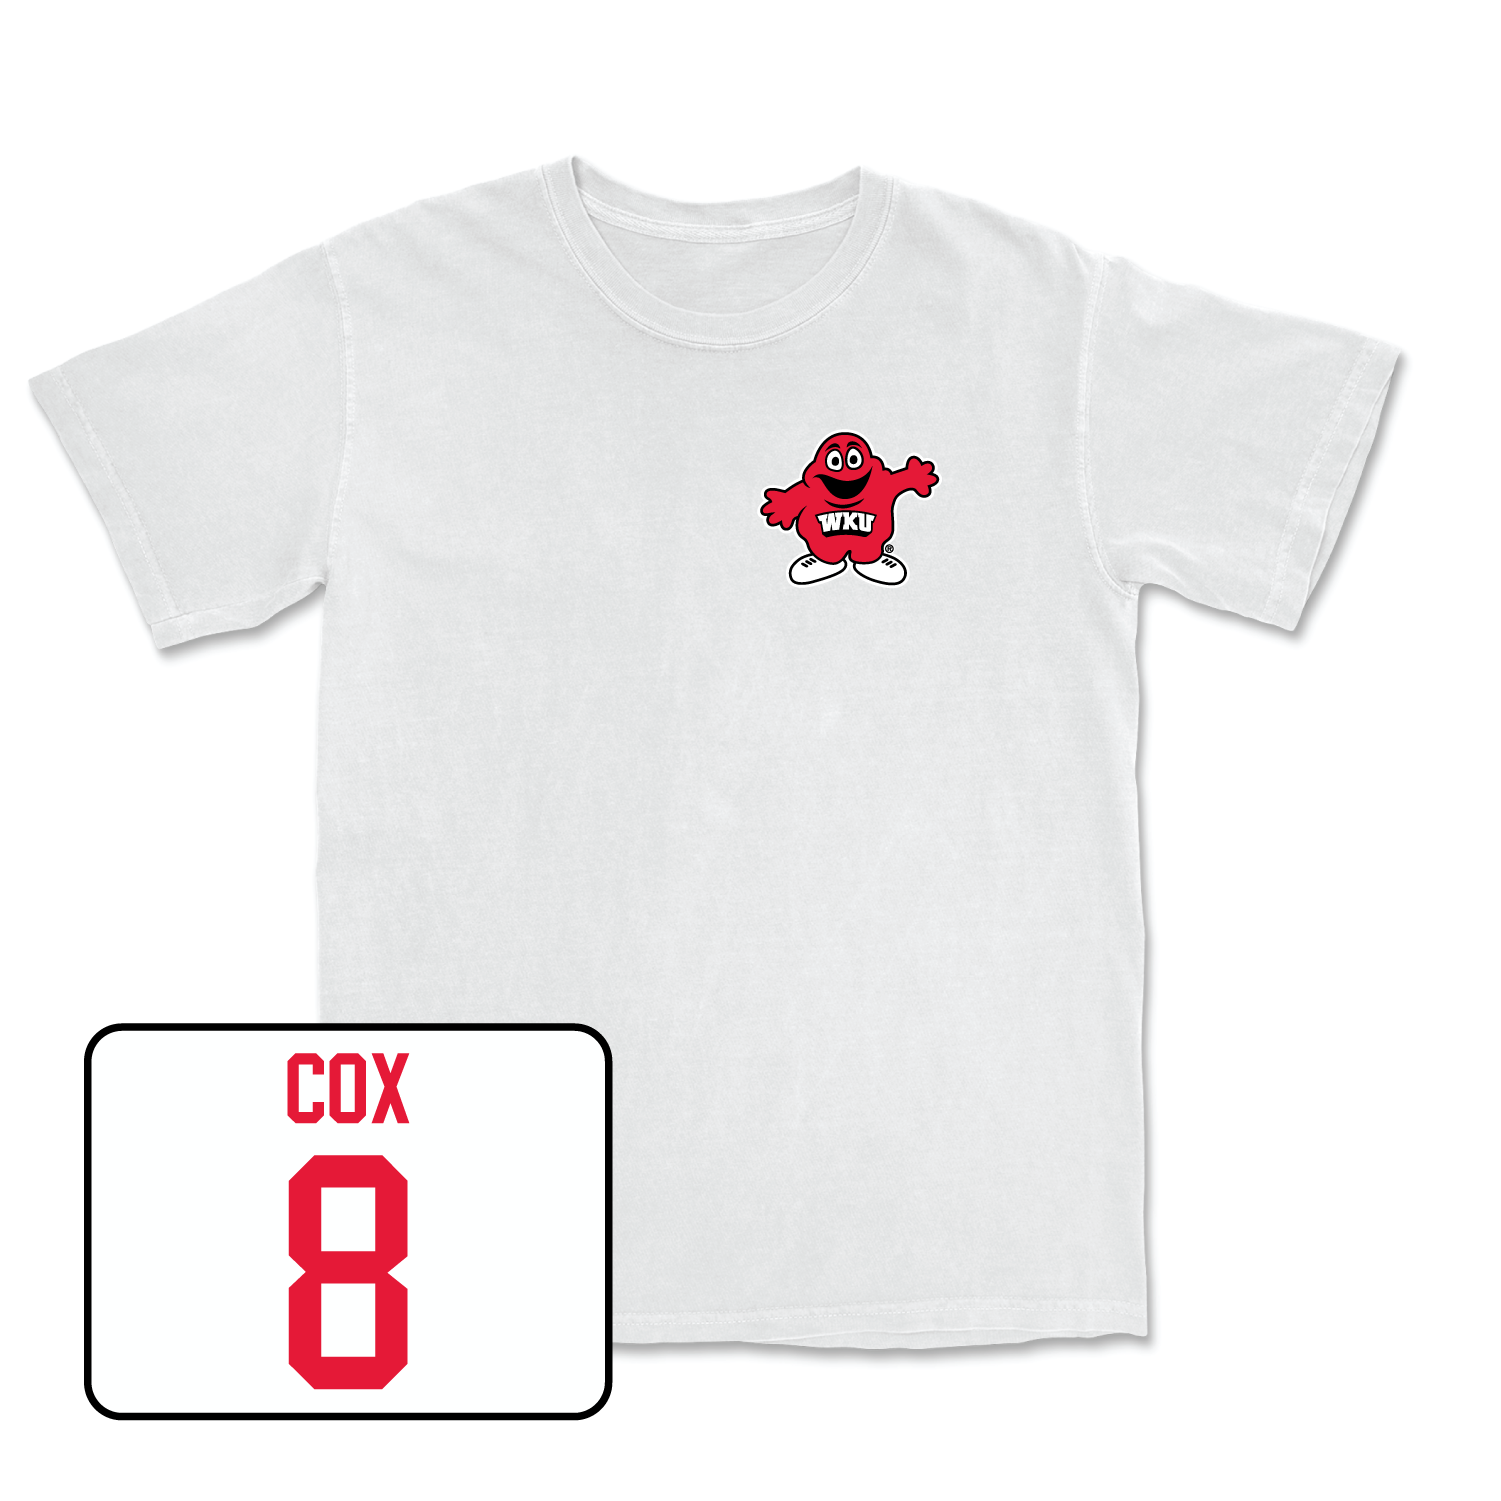 White Women's Volleyball Big Red Comfort Colors Tee 4X-Large / Kaylee Cox | #8